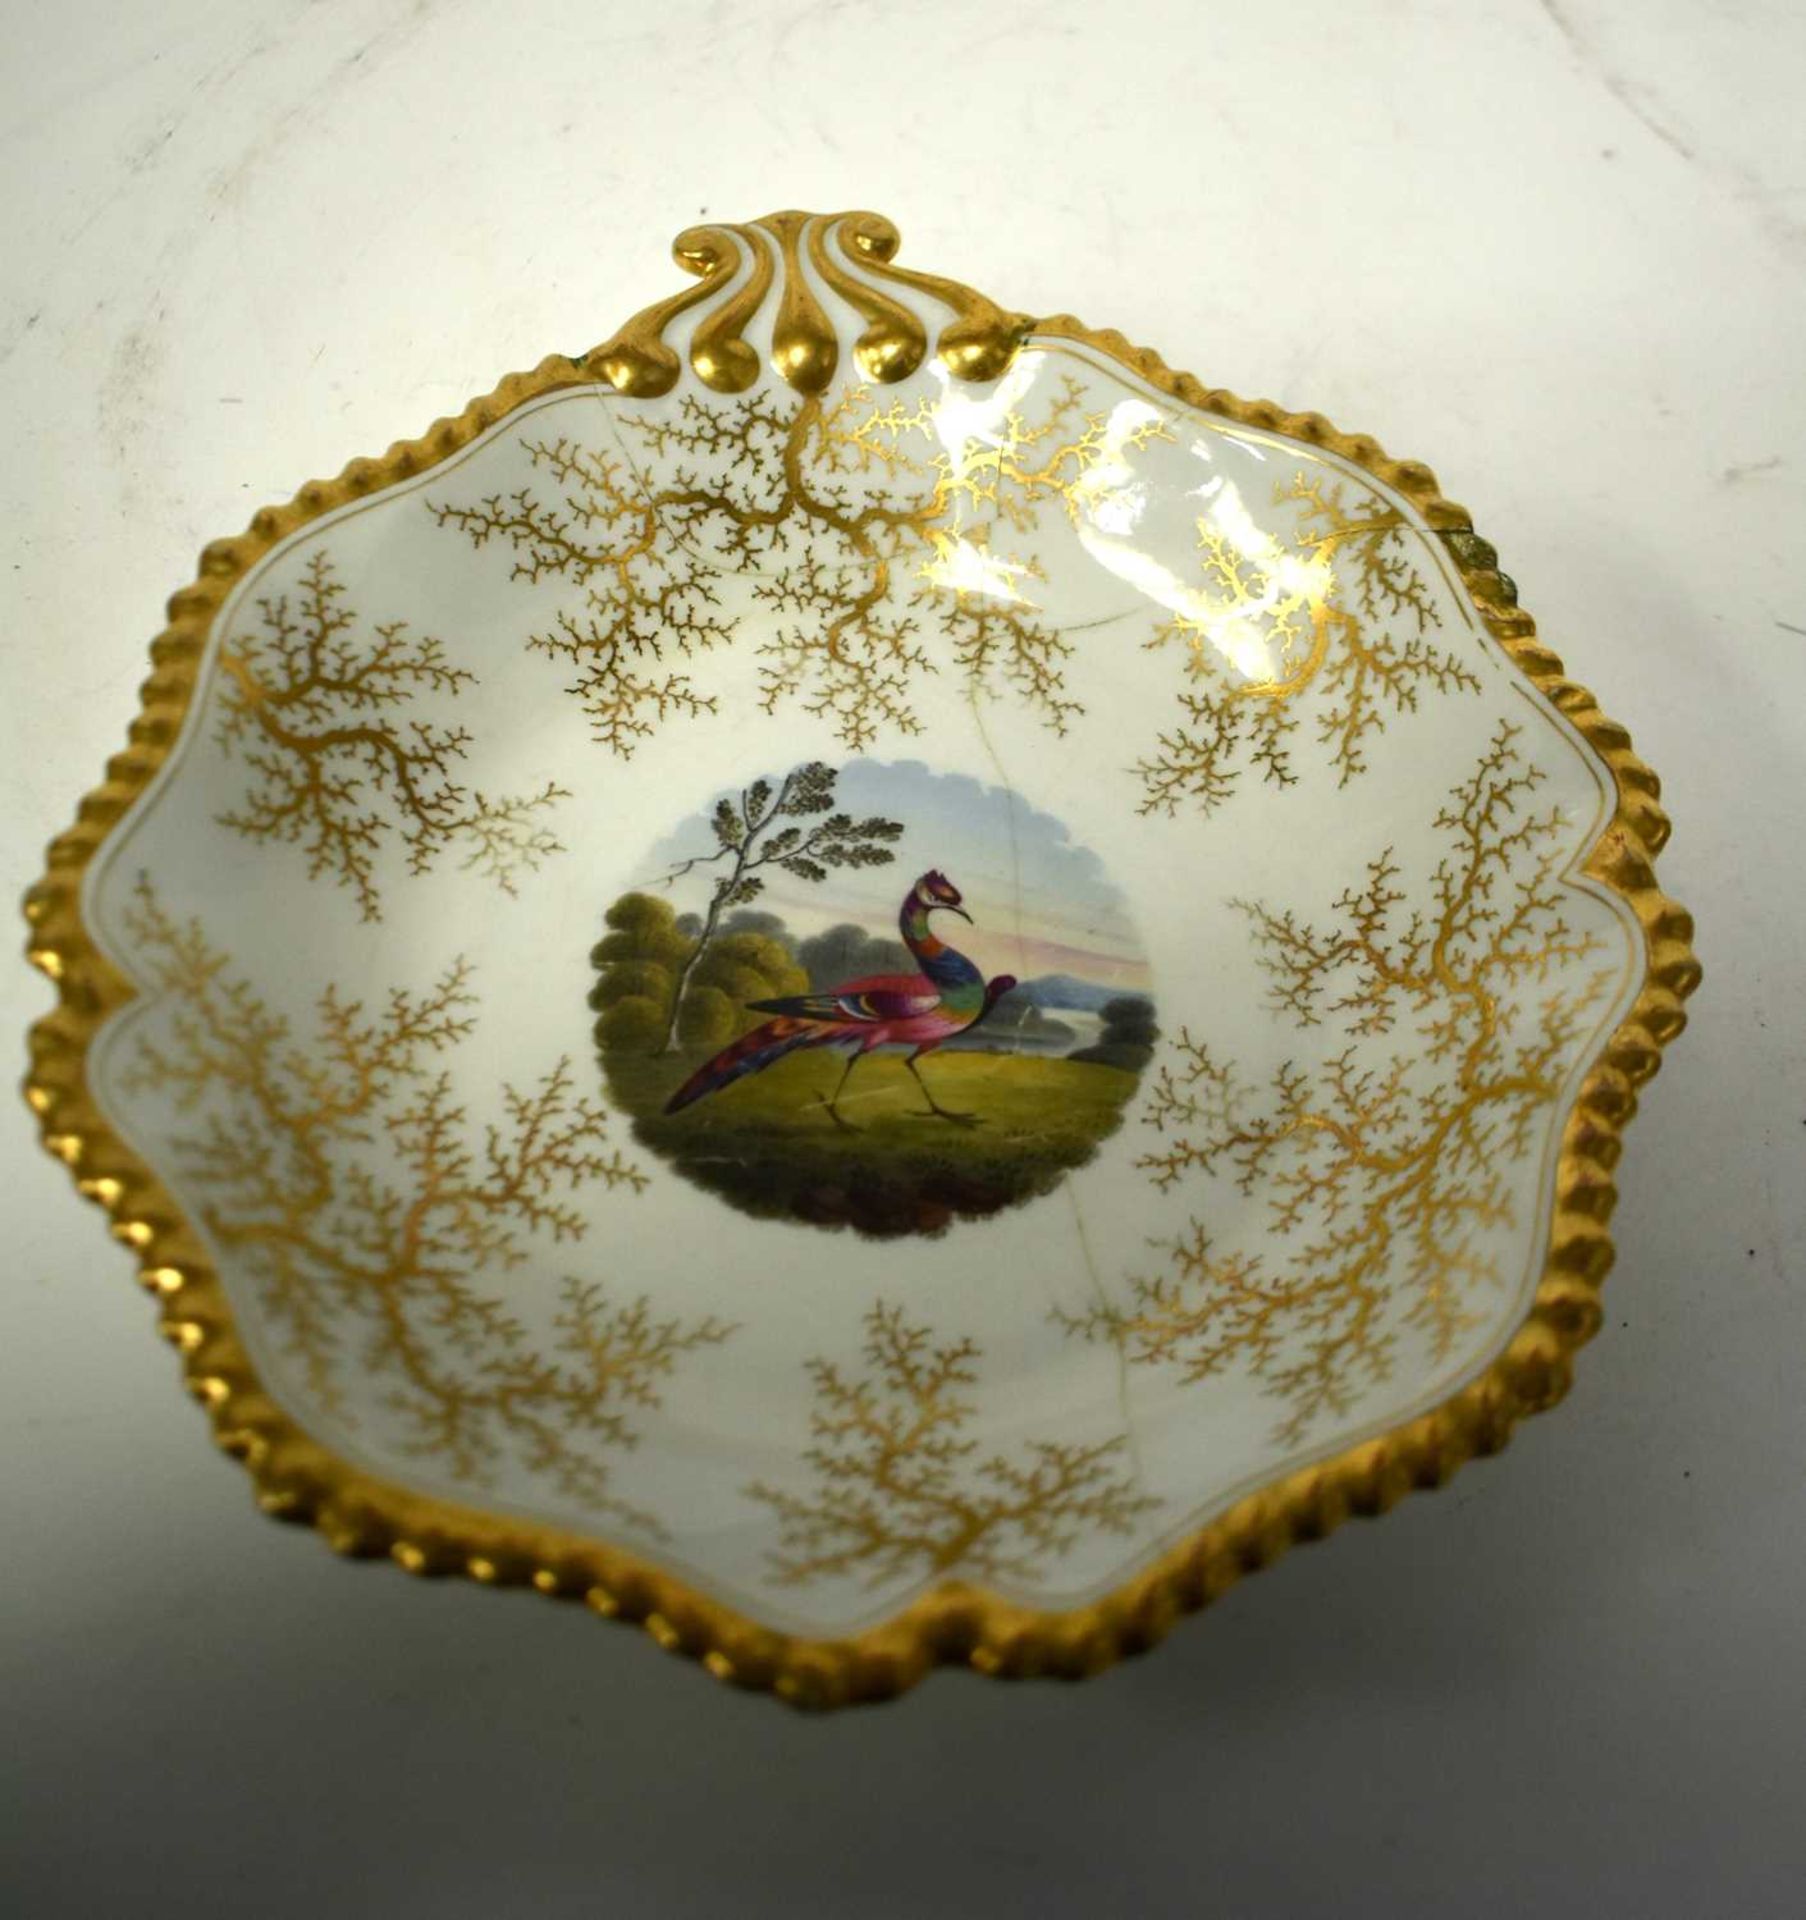 A FINE EARLY 19TH CENTURY FLIGHT BARR AND BARR WORCESTER DESSERT SERVICE painted with landscapes and - Image 17 of 32